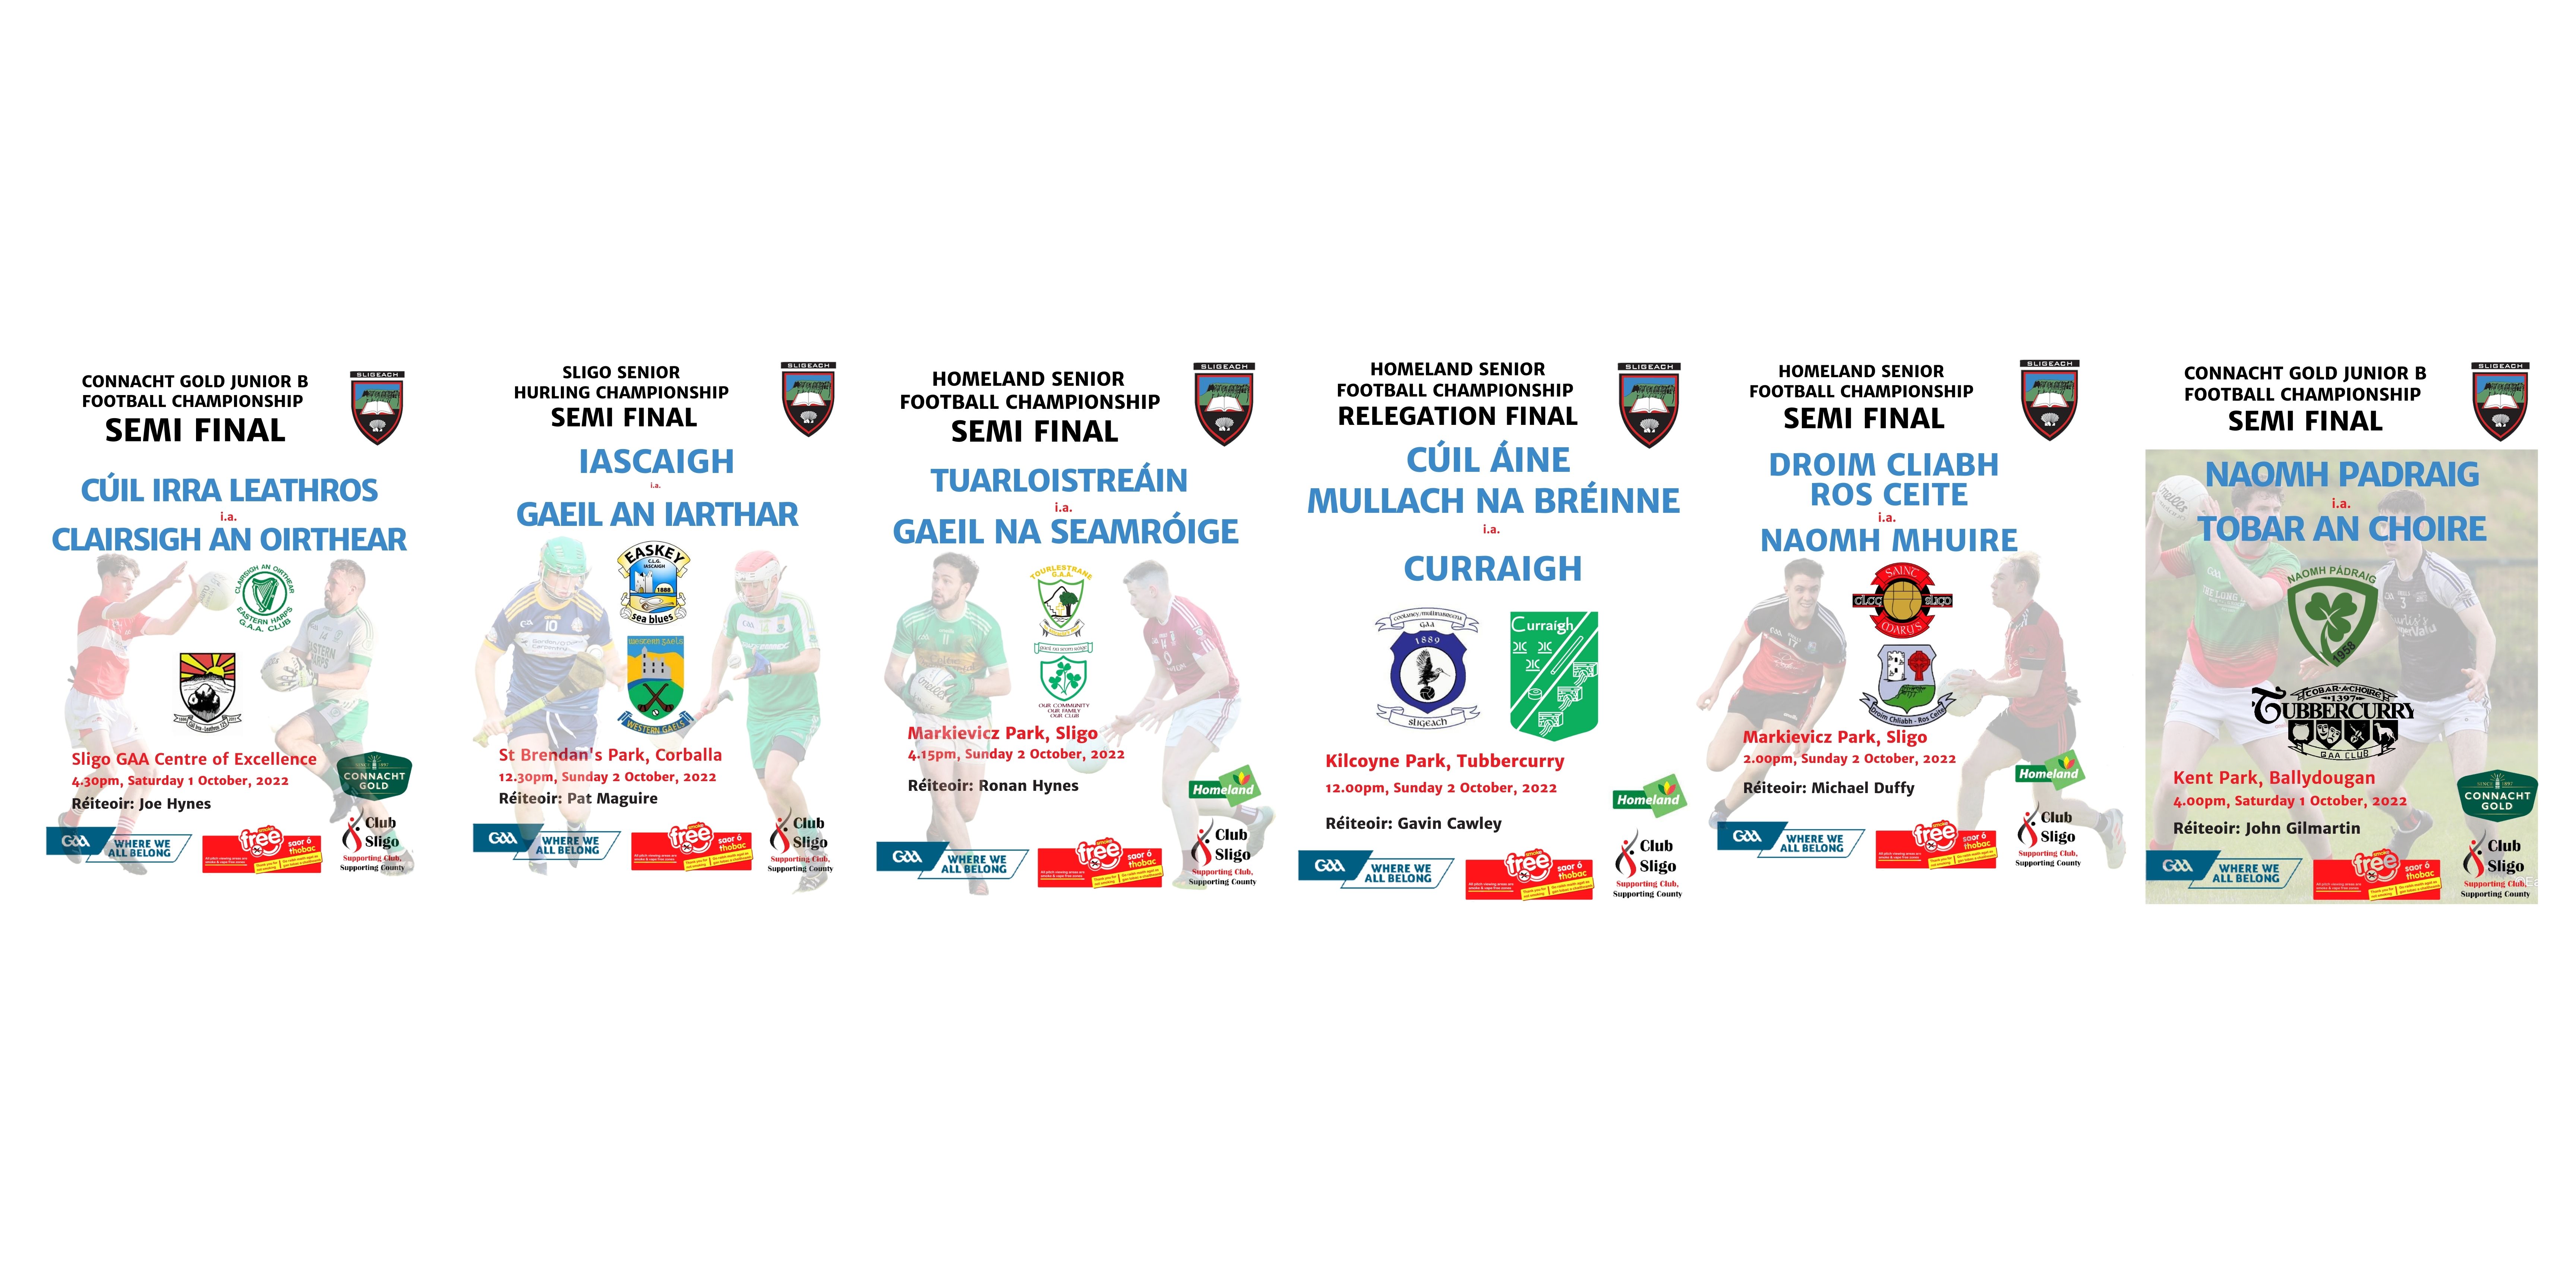 Match Programmes - Saturday and Sunday 1 & 2 October 